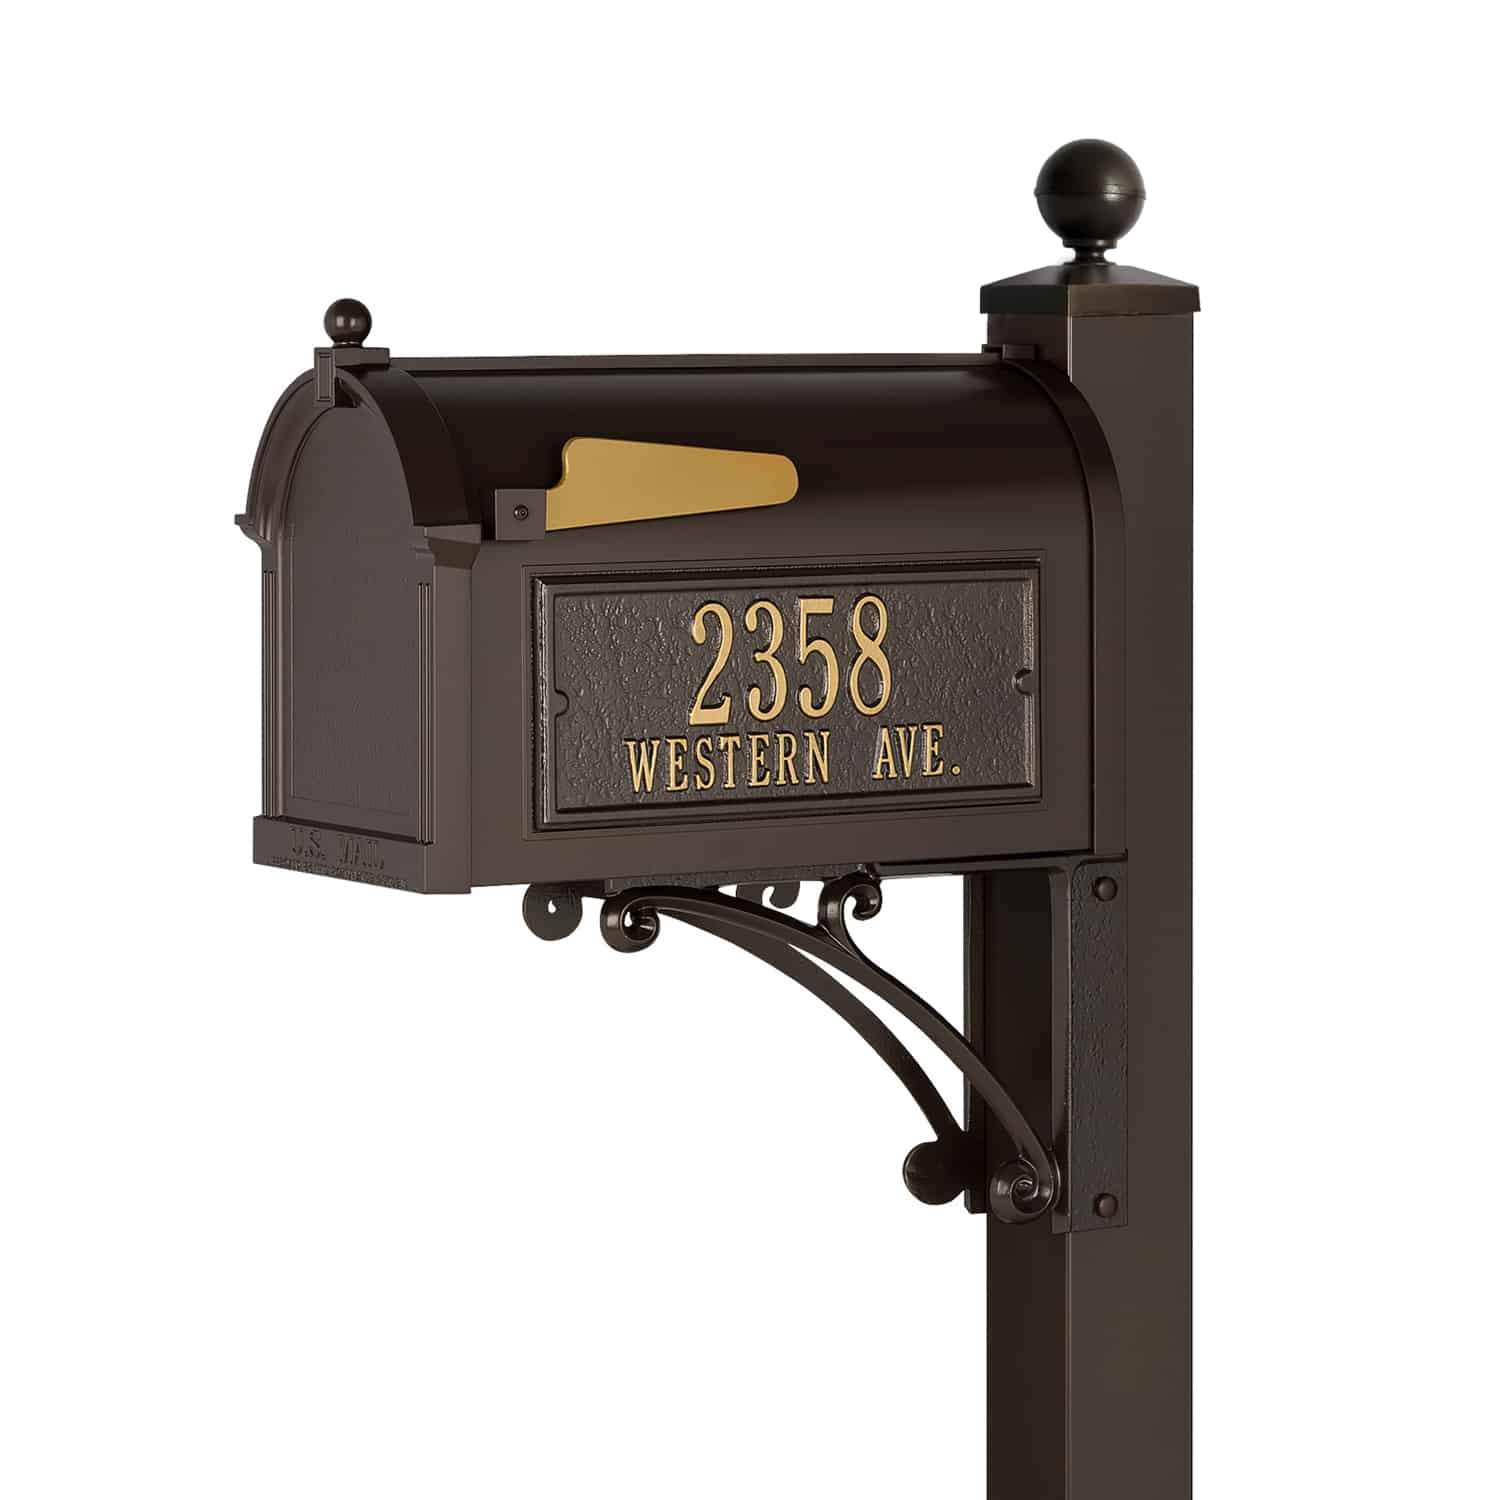 Whitehall Deluxe Capitol Mailbox Package Product Image